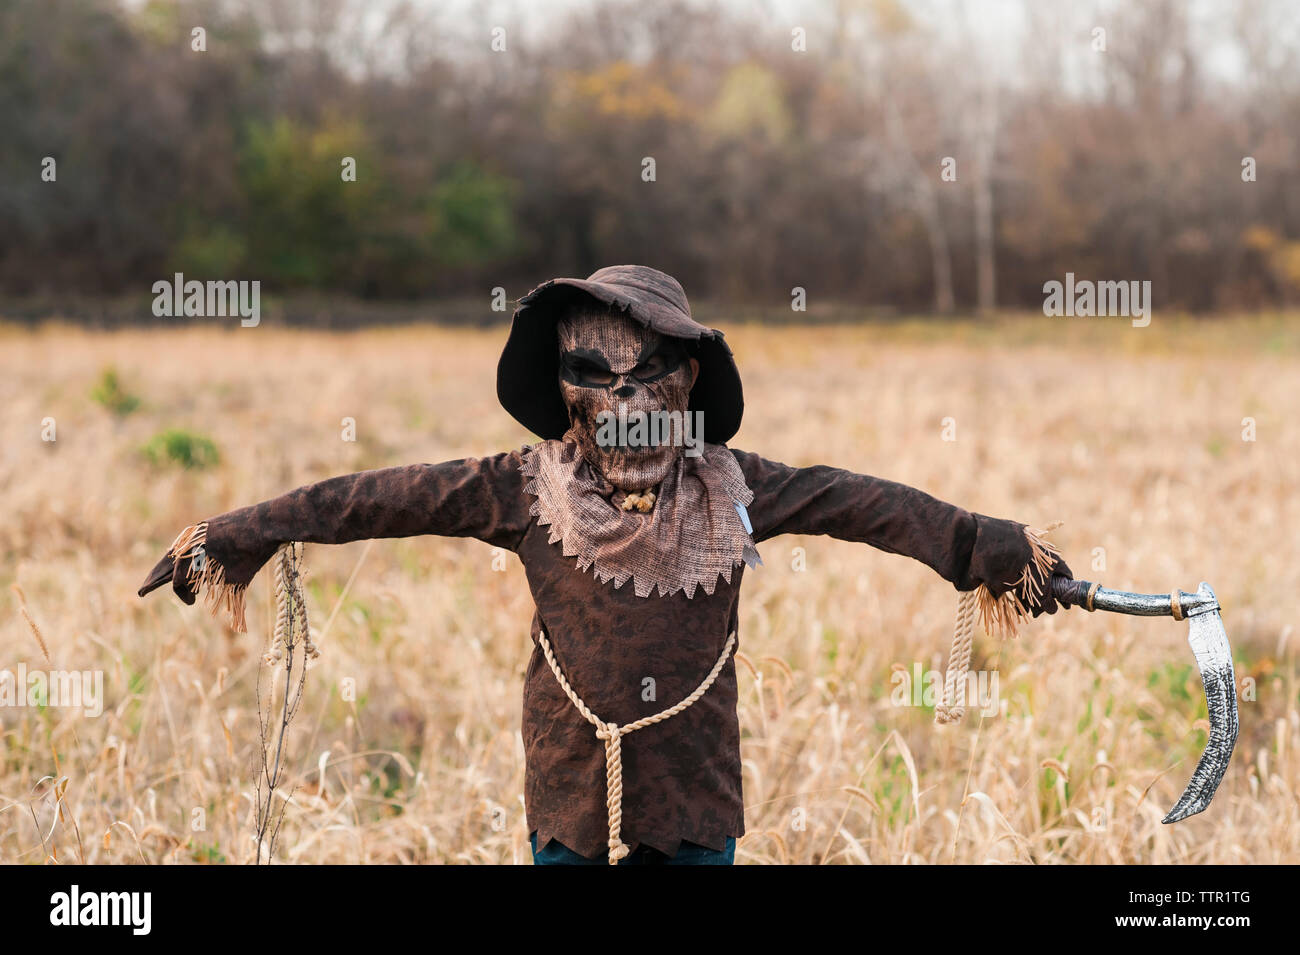 Boy dressed in spooky scarecrow halloween costume stands in field Stock Photo